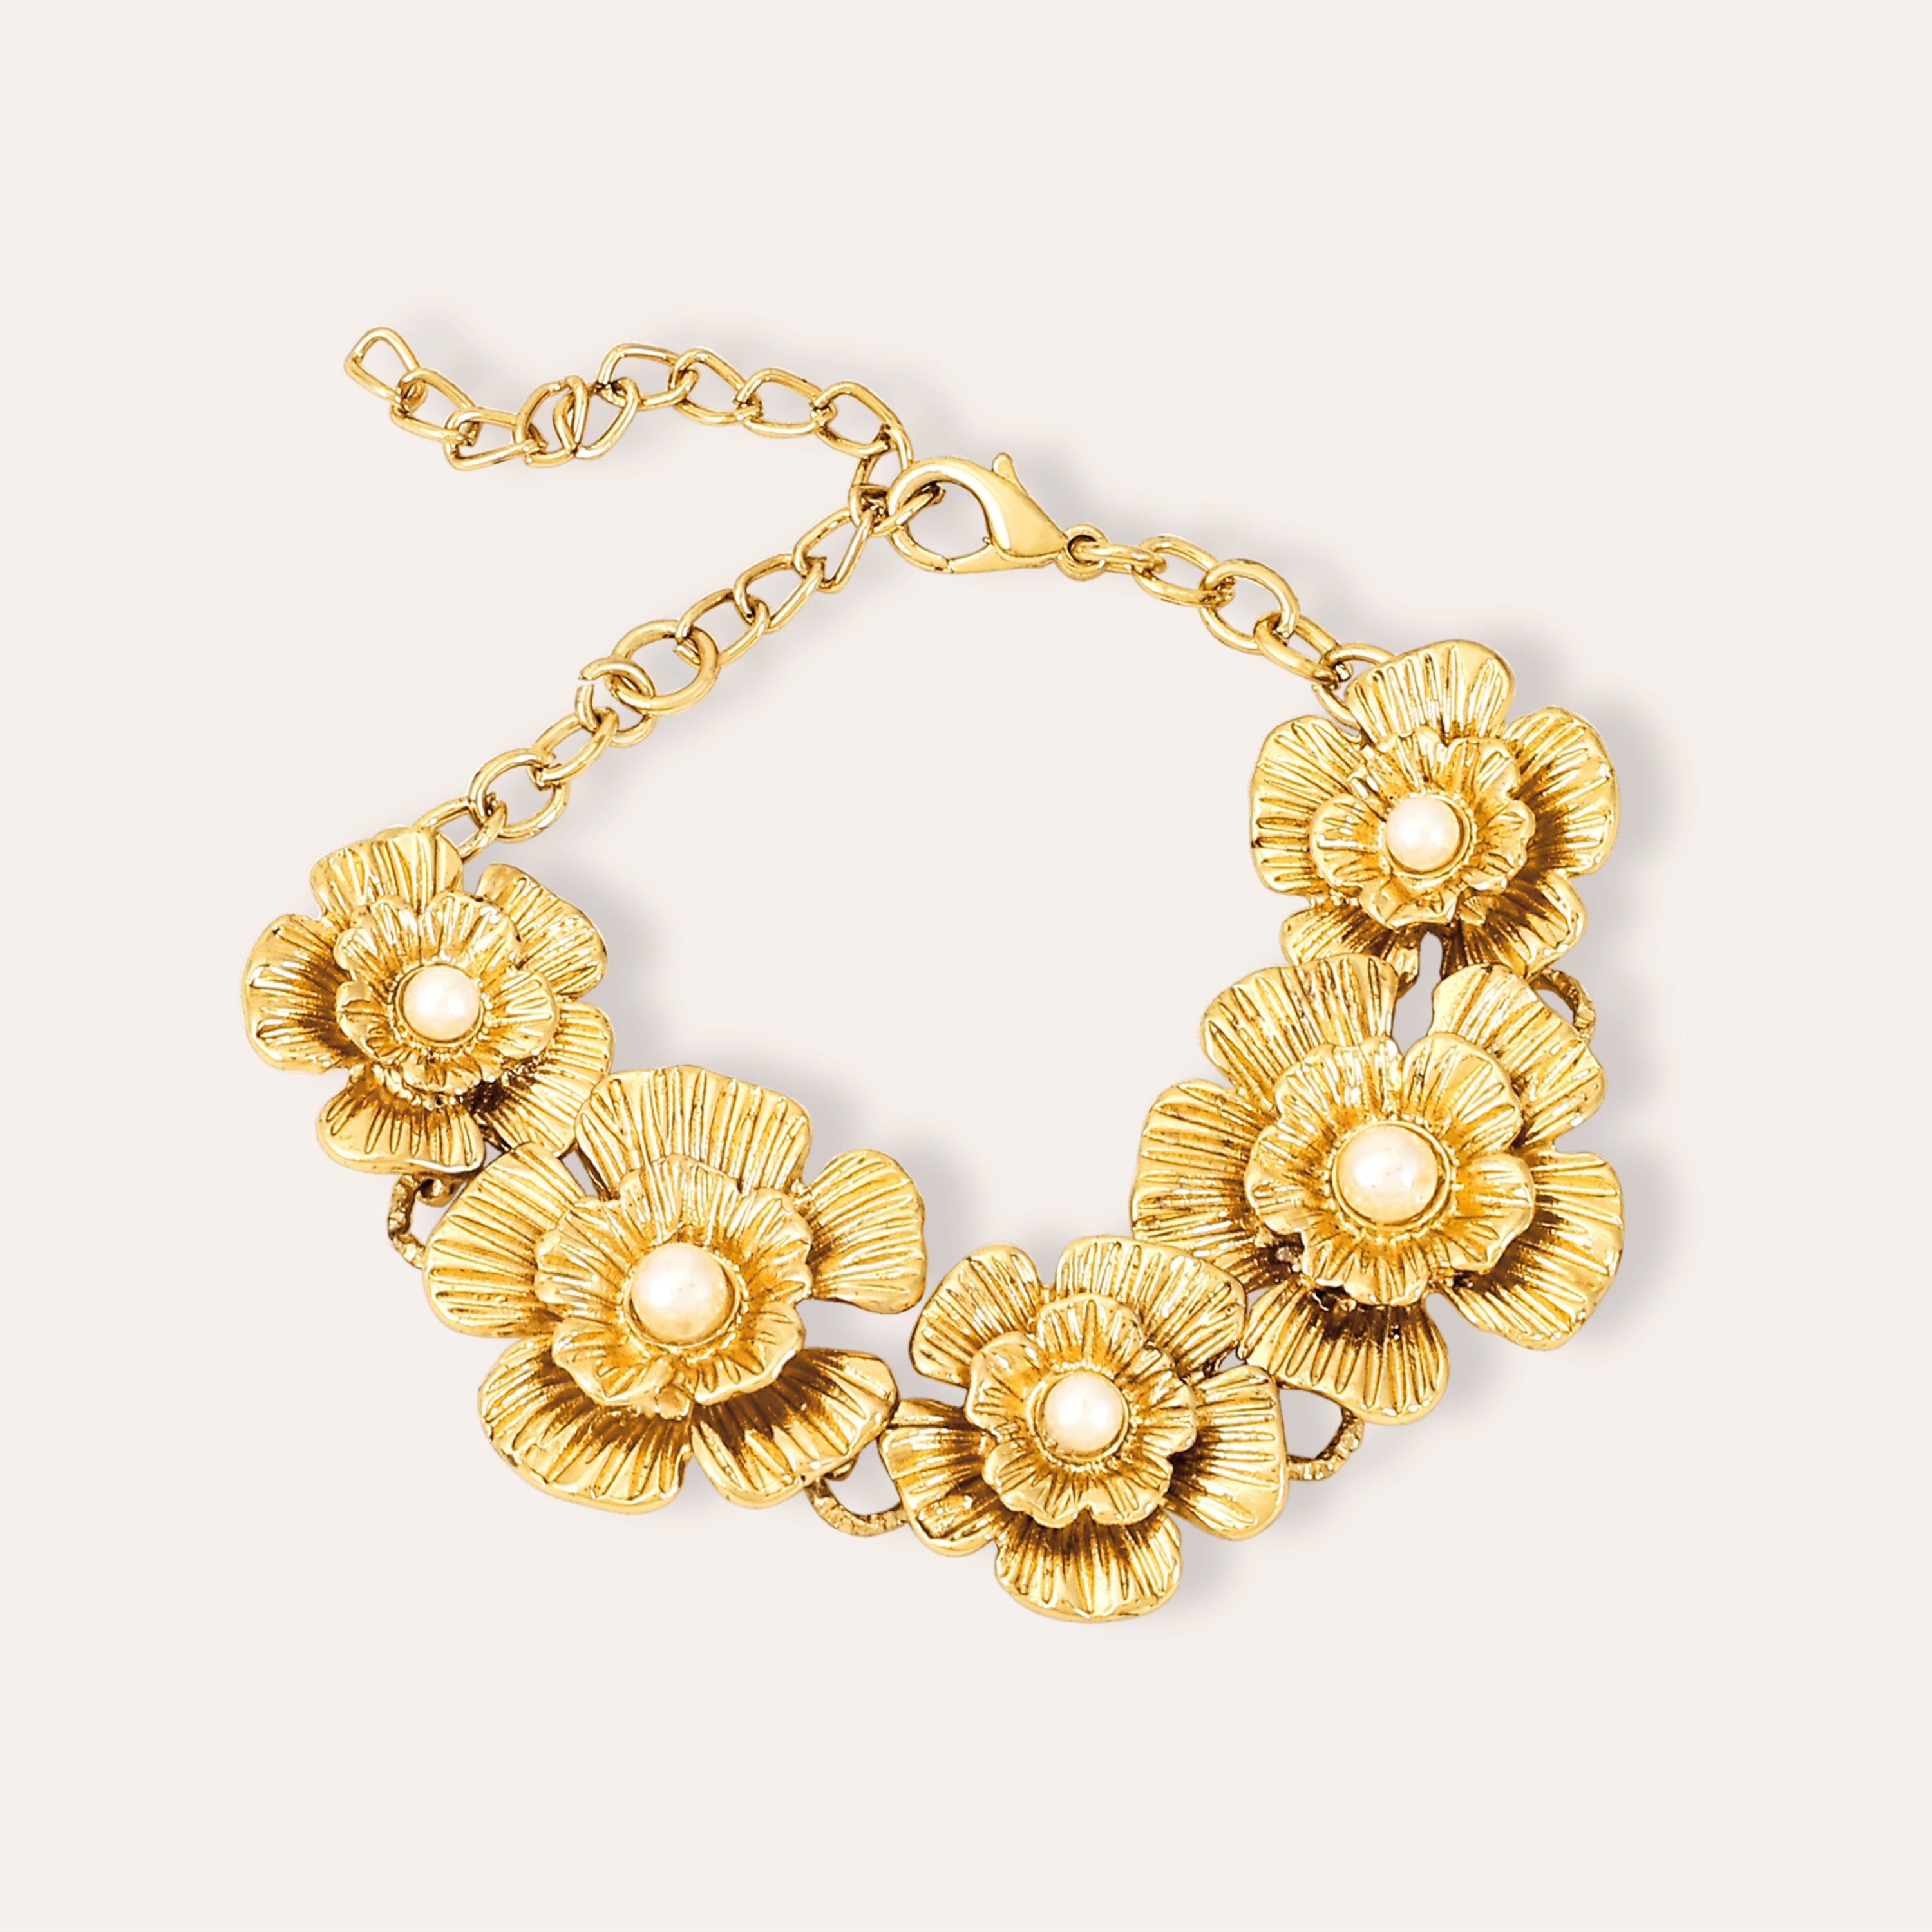 TFC Bloom Essence Gold Plated bracelet-Discover our stunning collection of stylish bracelets for women, featuring exquisite pearl bracelets, handcrafted beaded bracelets, and elegant gold-plated designs. Enjoy cheapest anti-tarnish fashion jewellery and long-lasting brilliance only at The Fun Company